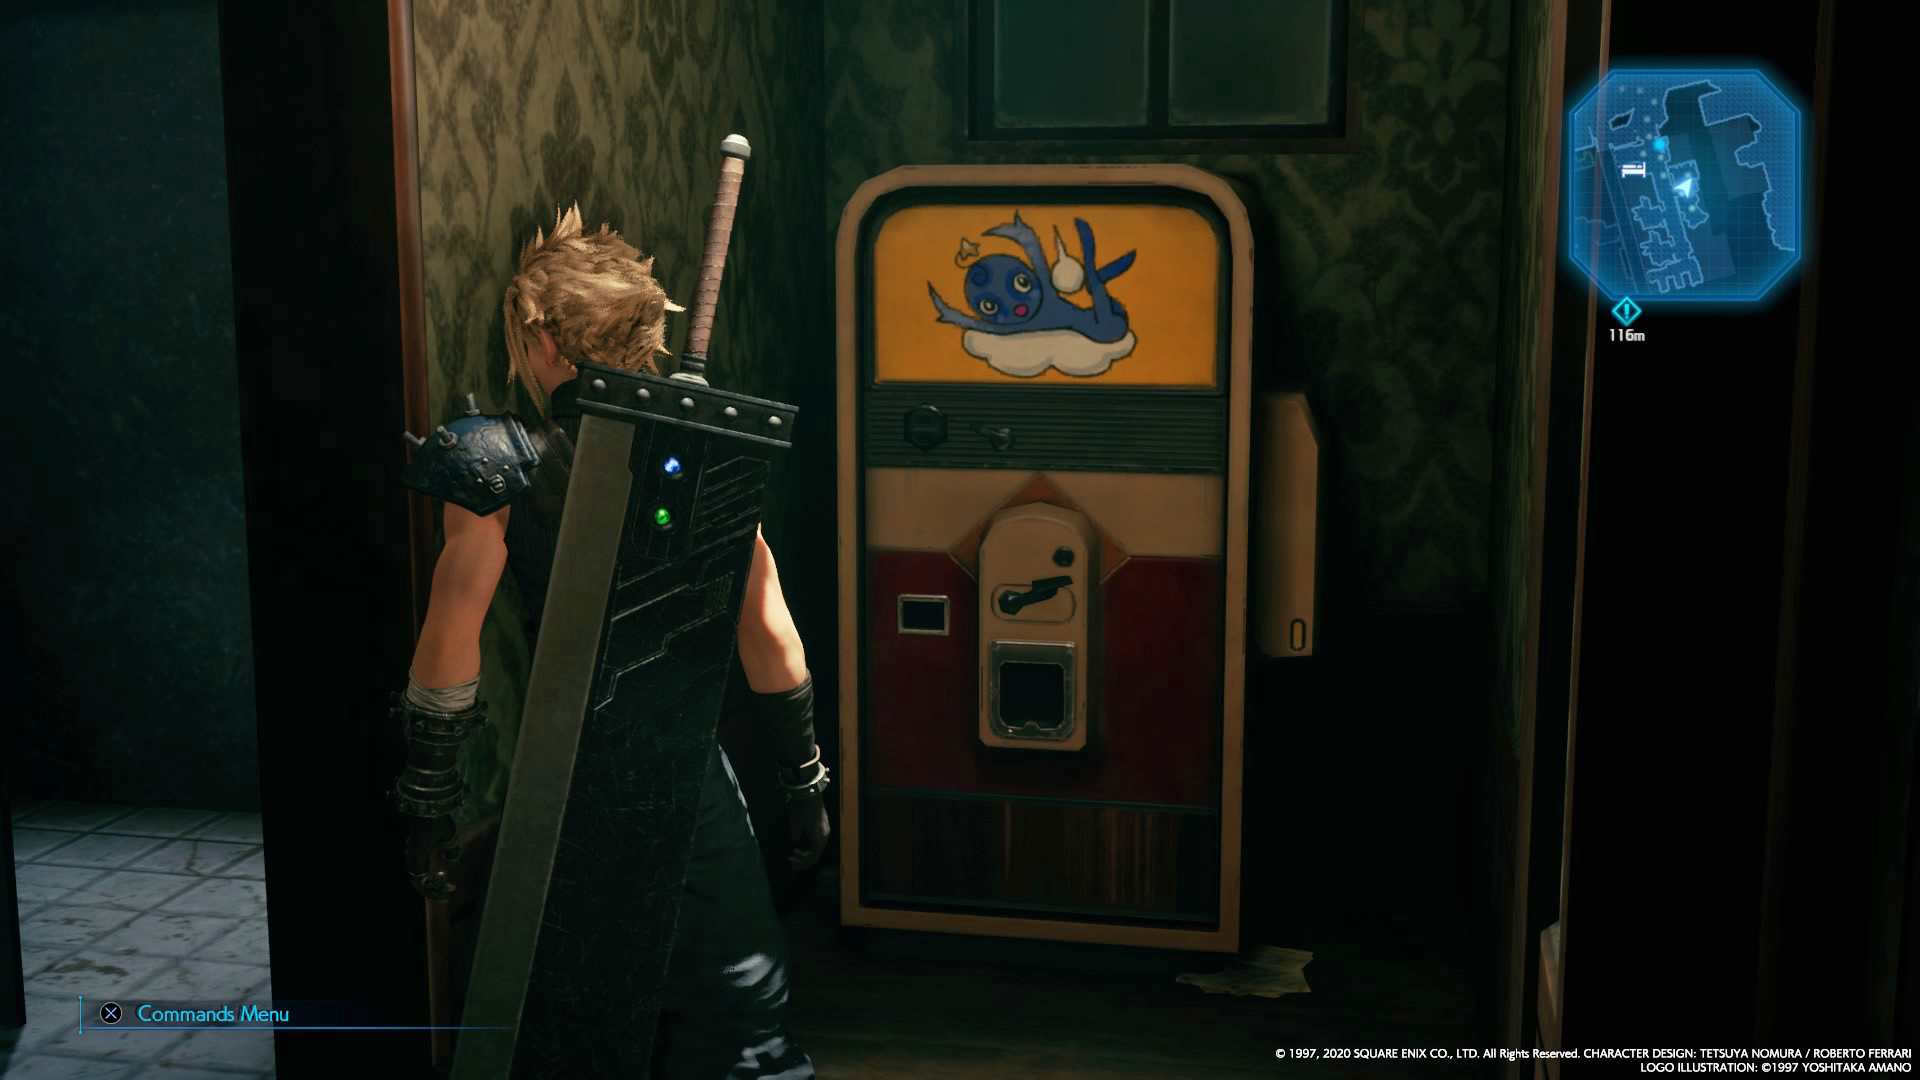 Final Fantasy Series The Video Game Soda Machine Project